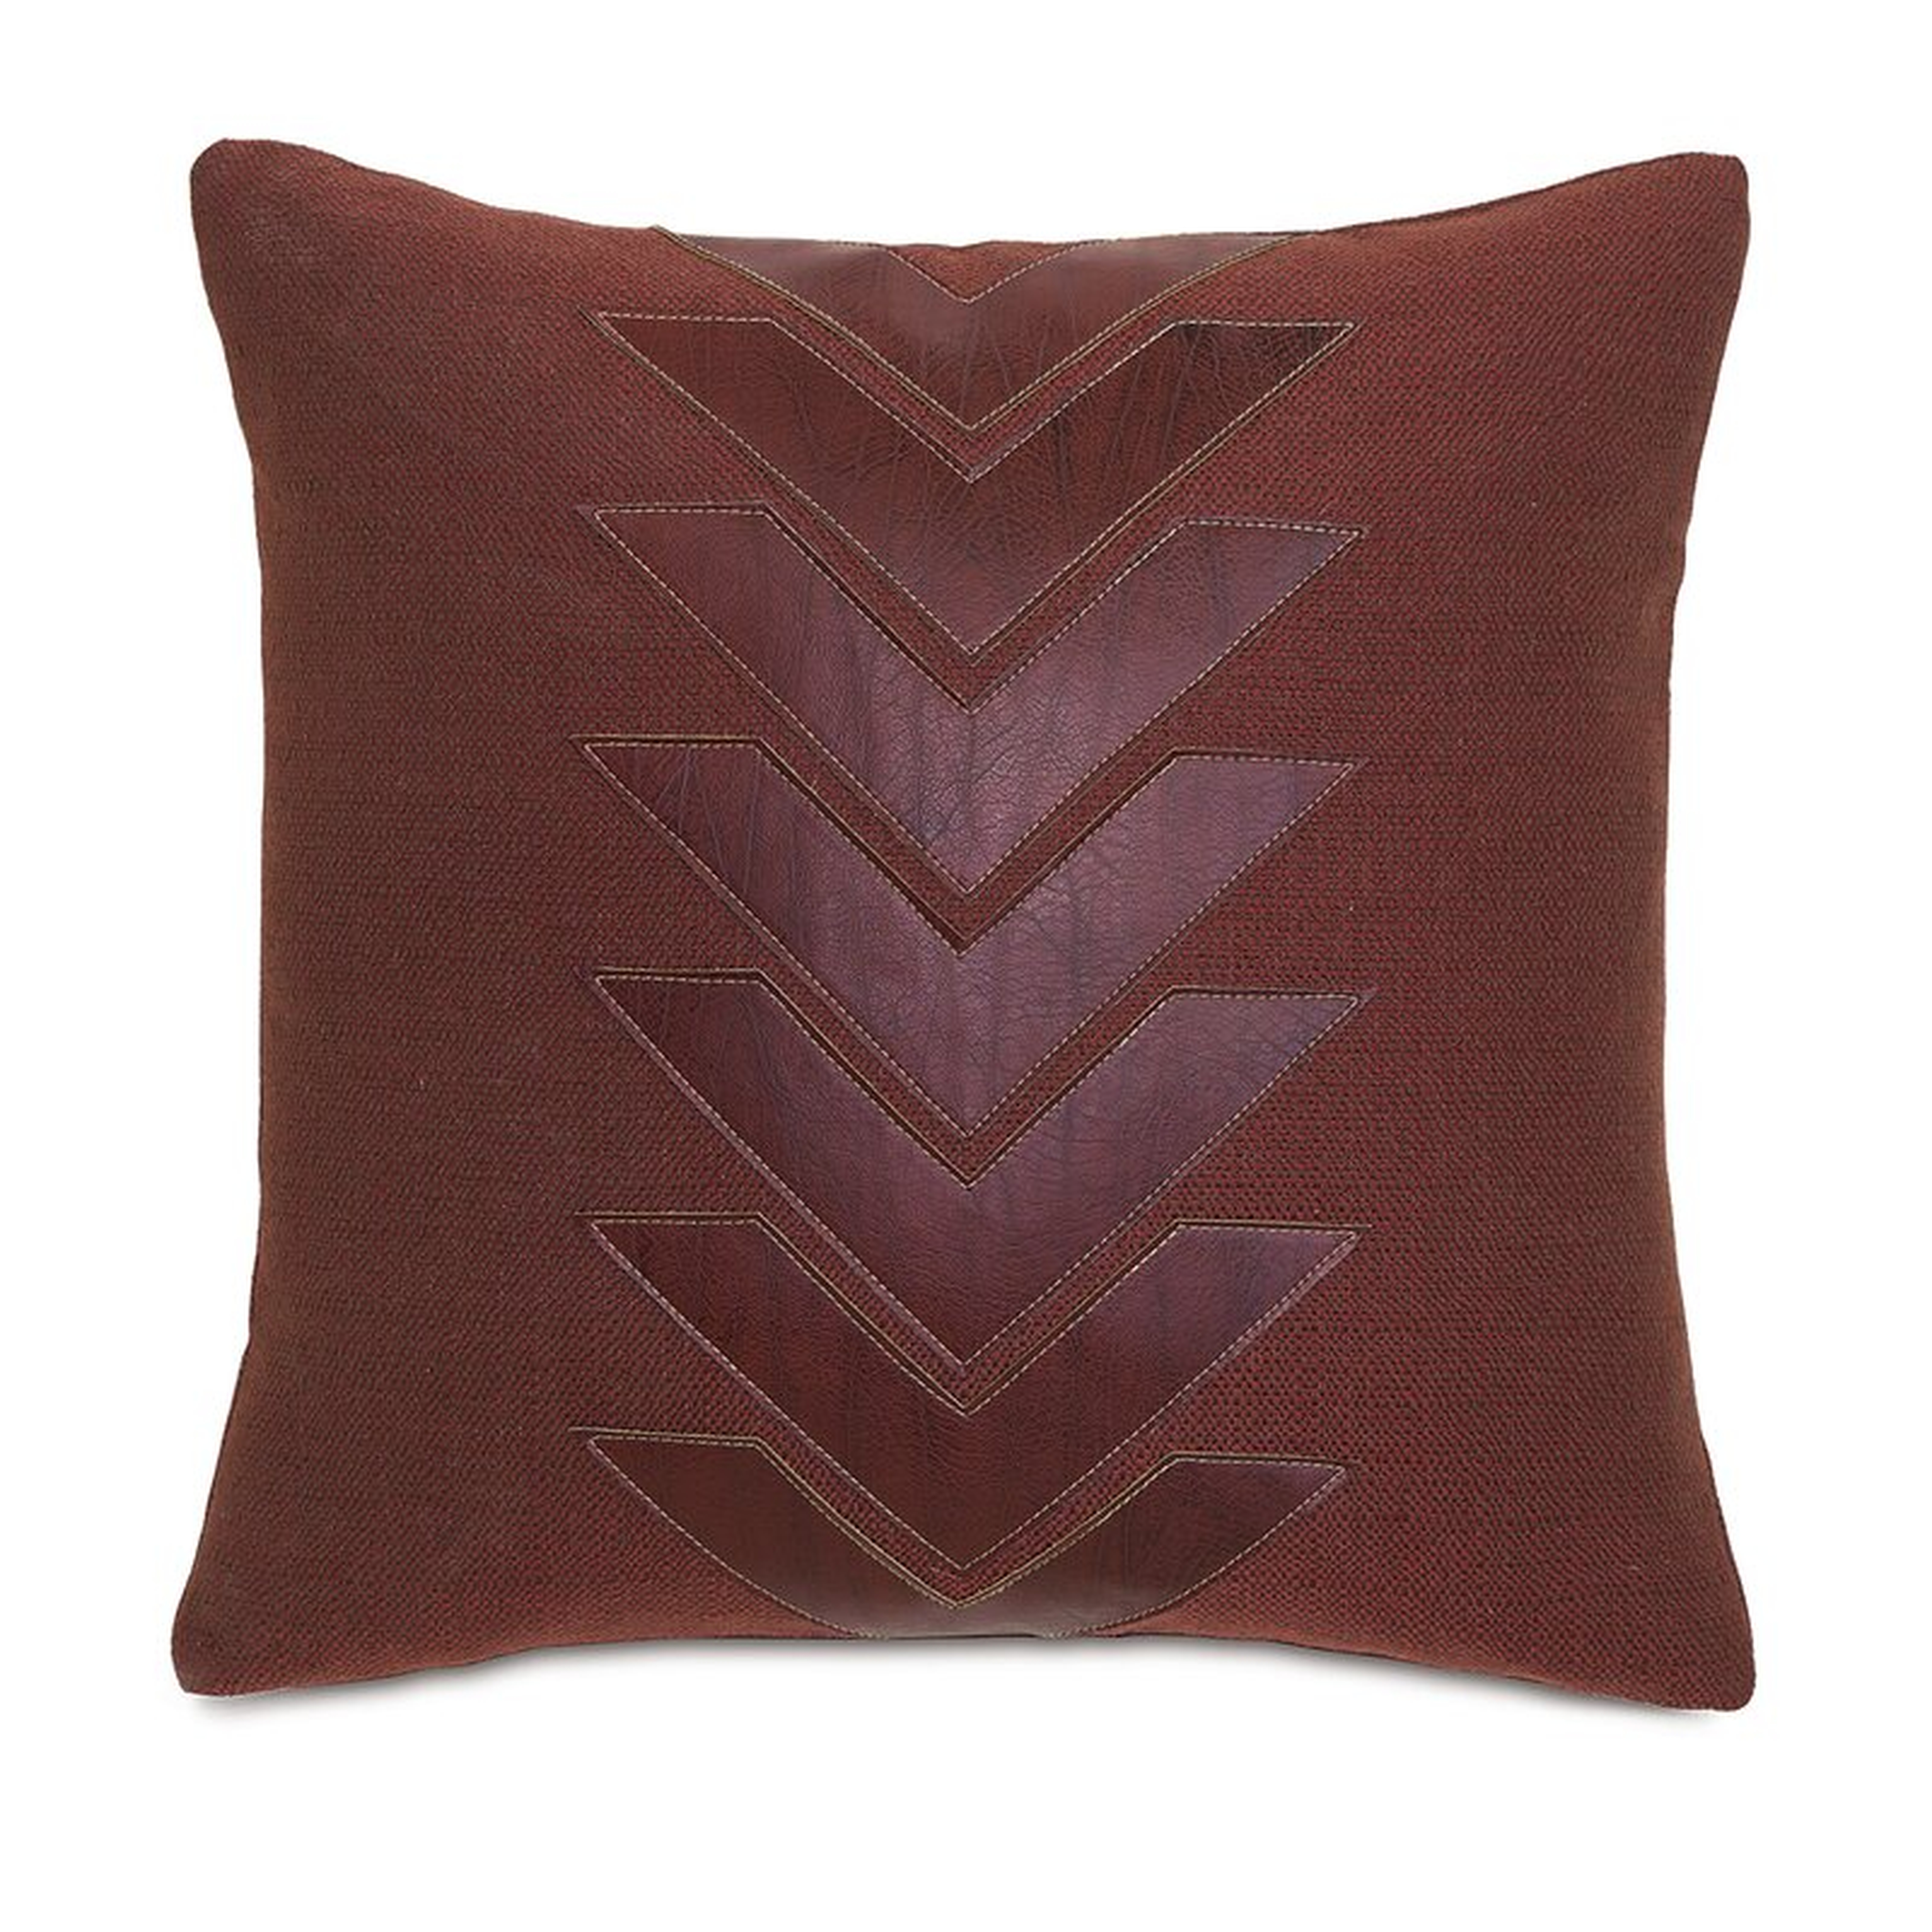 Eastern Accents Bellingham Chevron Throw Pillow Cover & Insert - Perigold